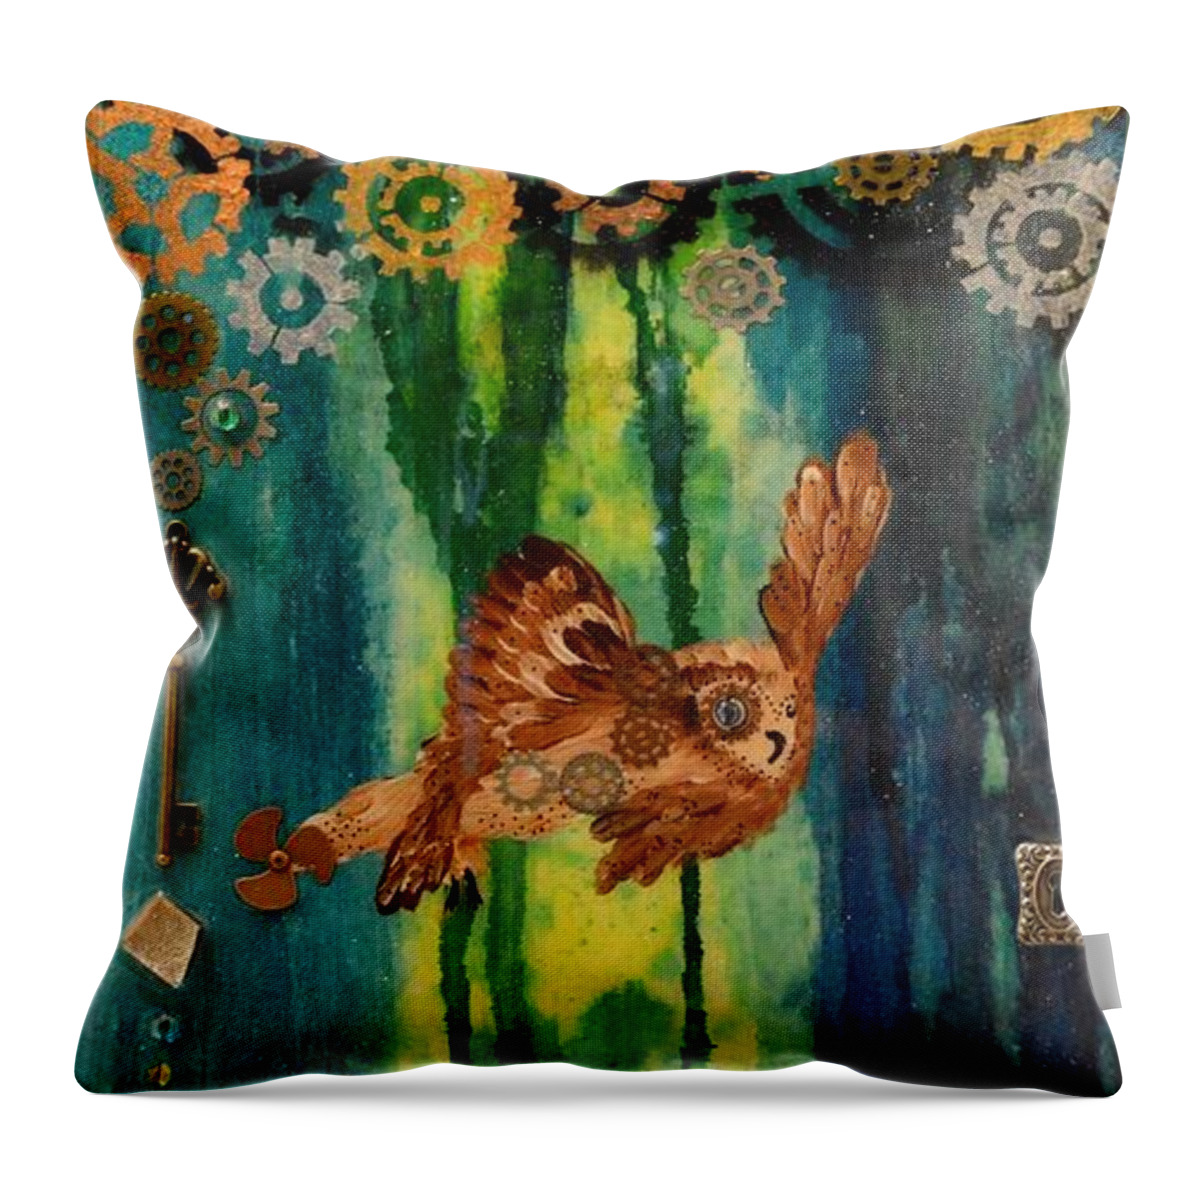 Iphone Cases Throw Pillow featuring the painting Steampunk Owl Blue Horizon by MiMi Stirn